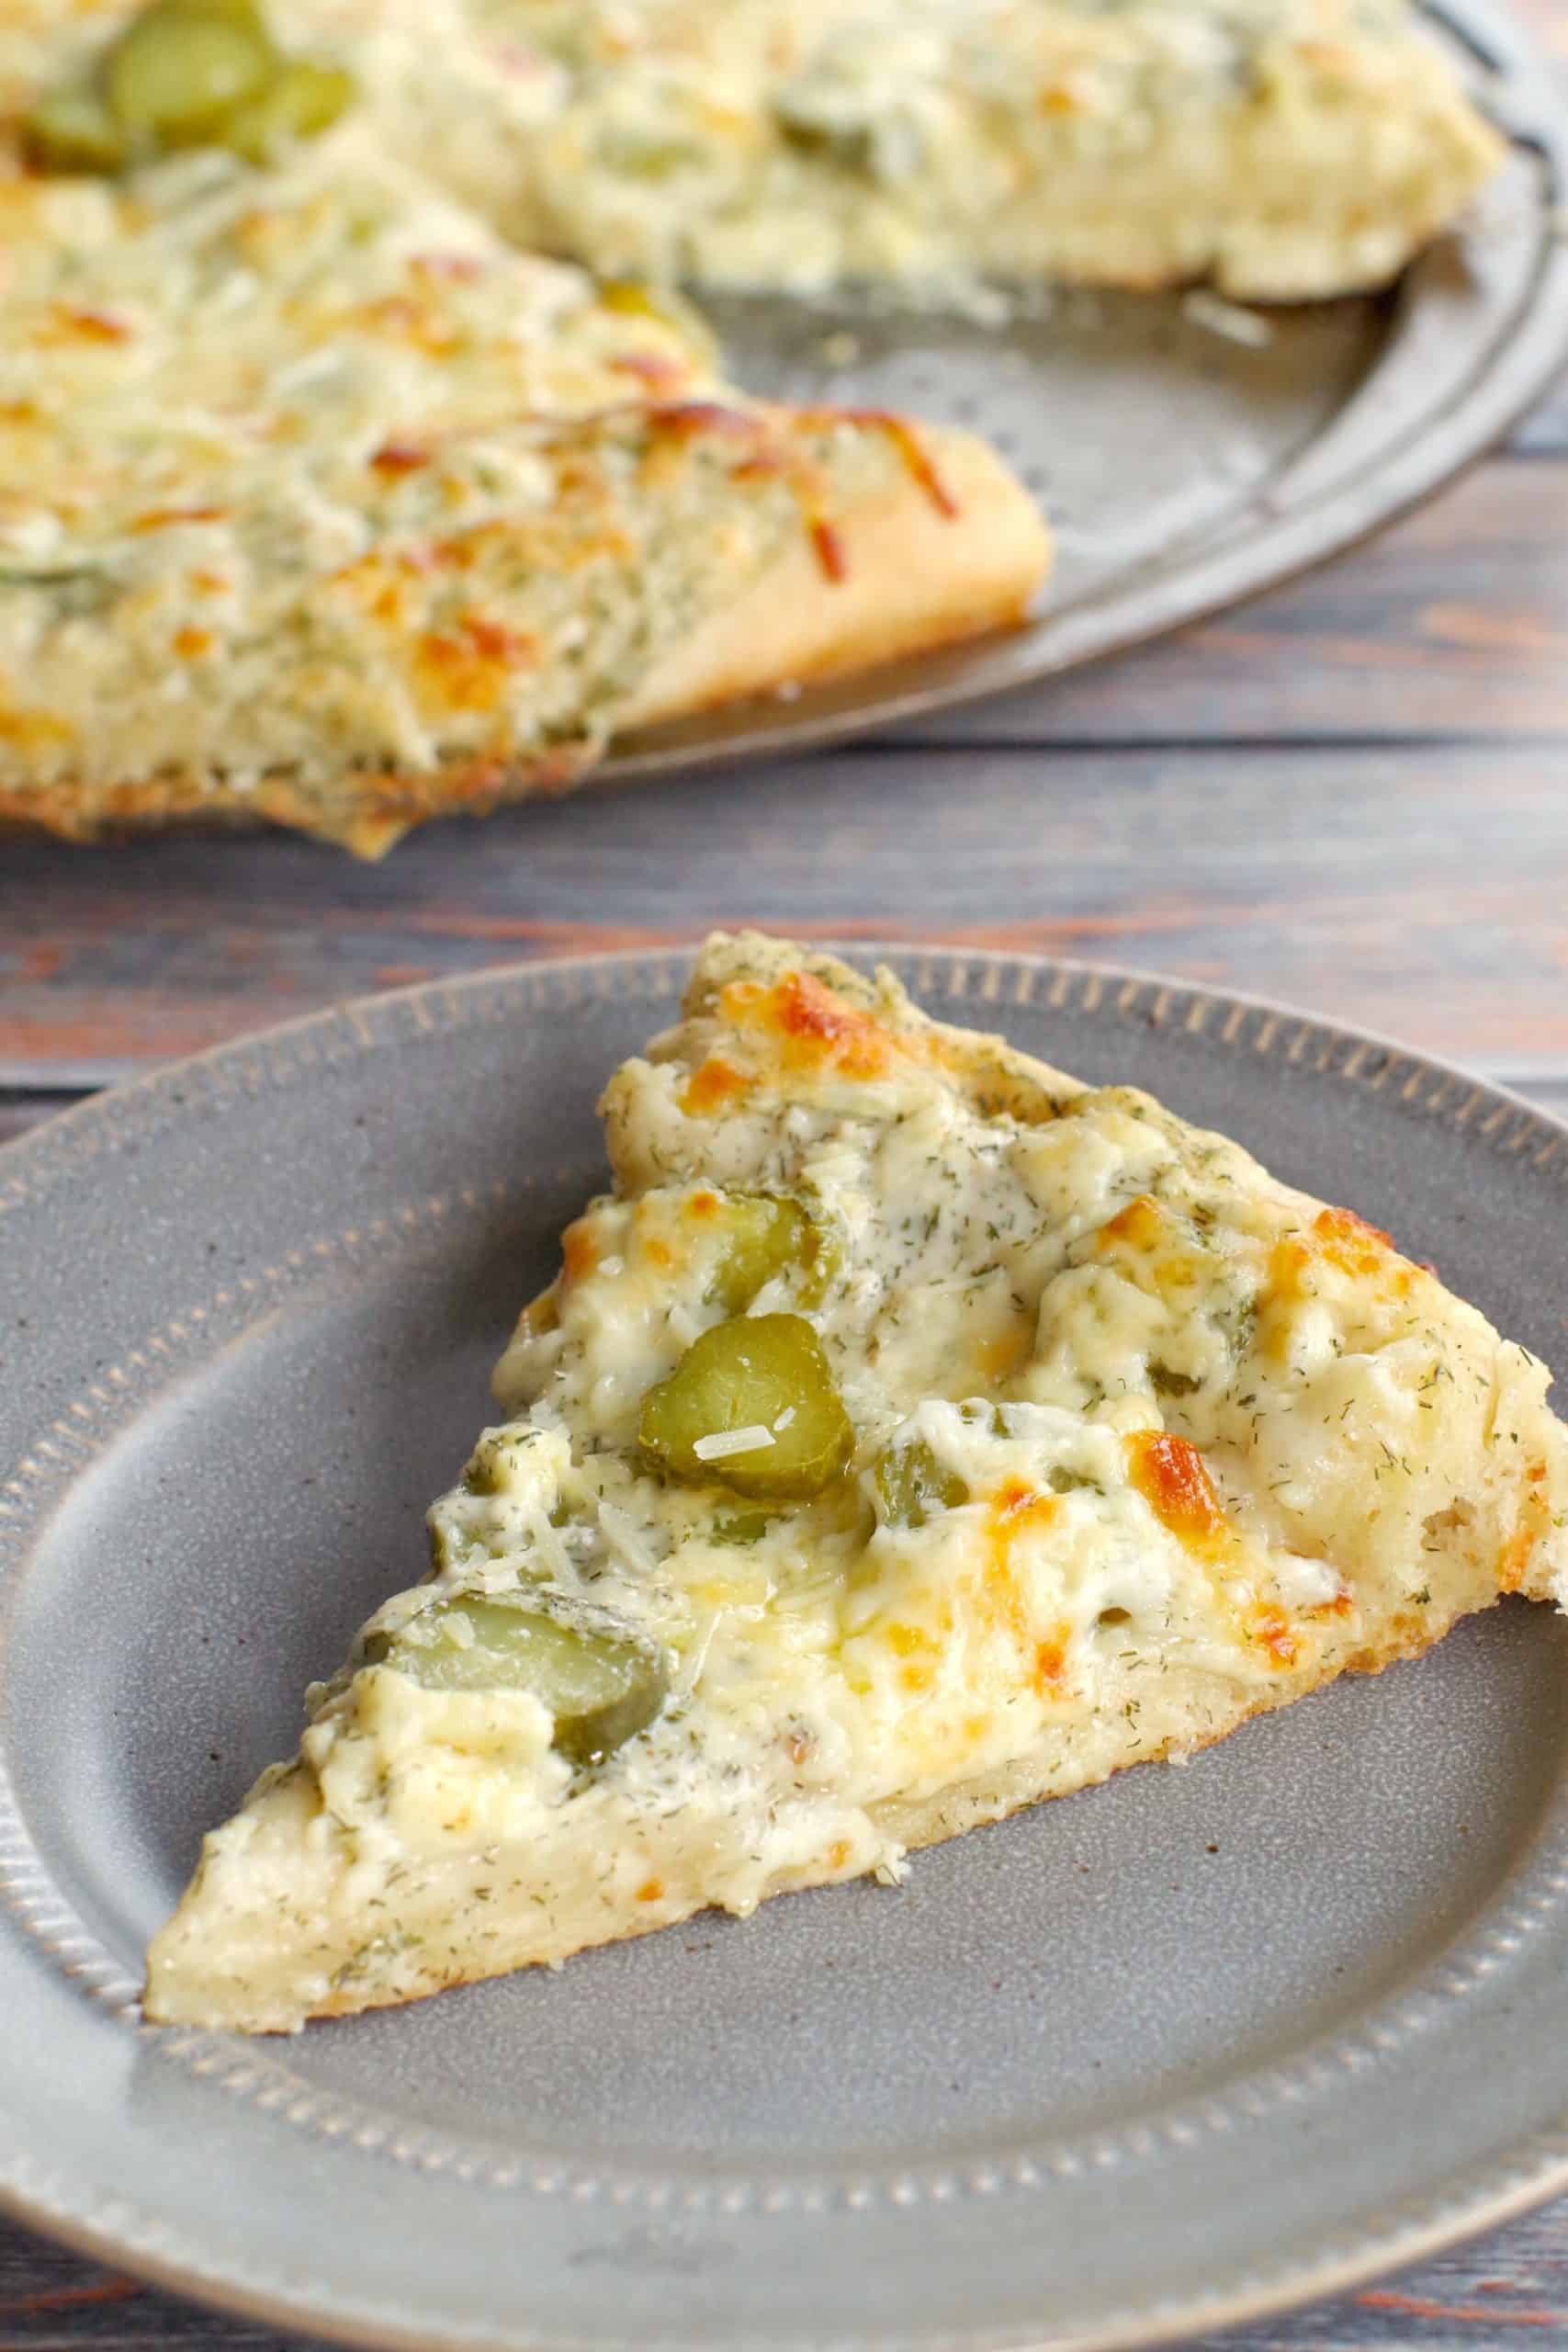 Dill pickle pizza.